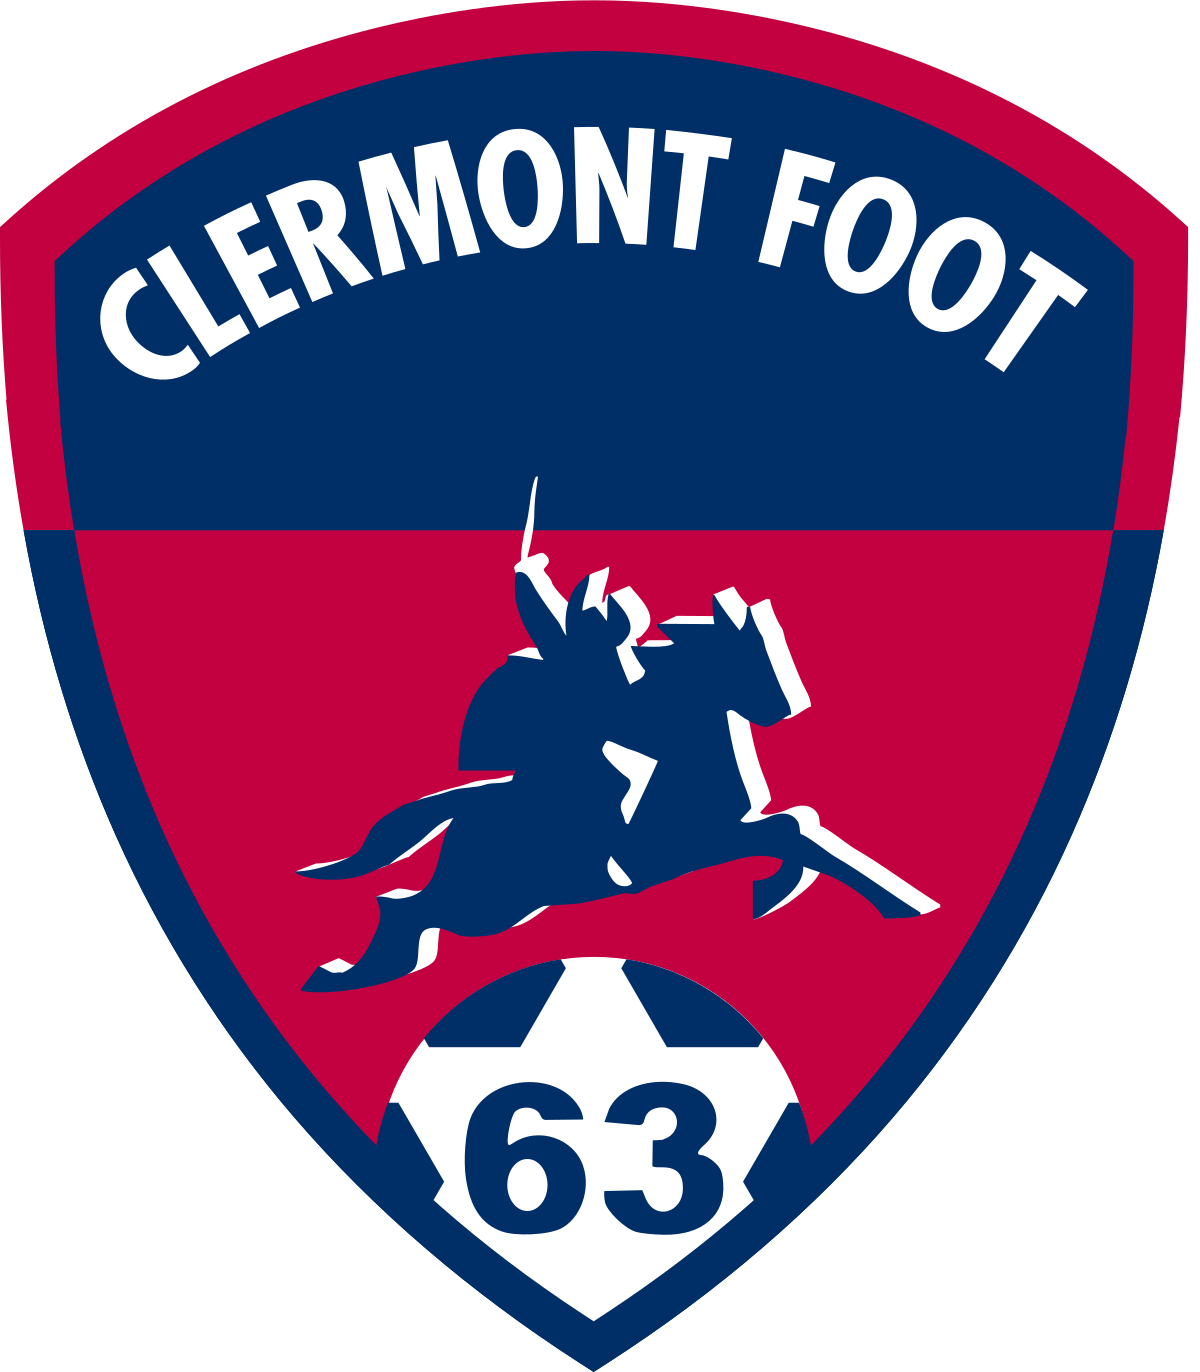 1200px-Logo_Clermont_Foot_63_2013.svg_.png